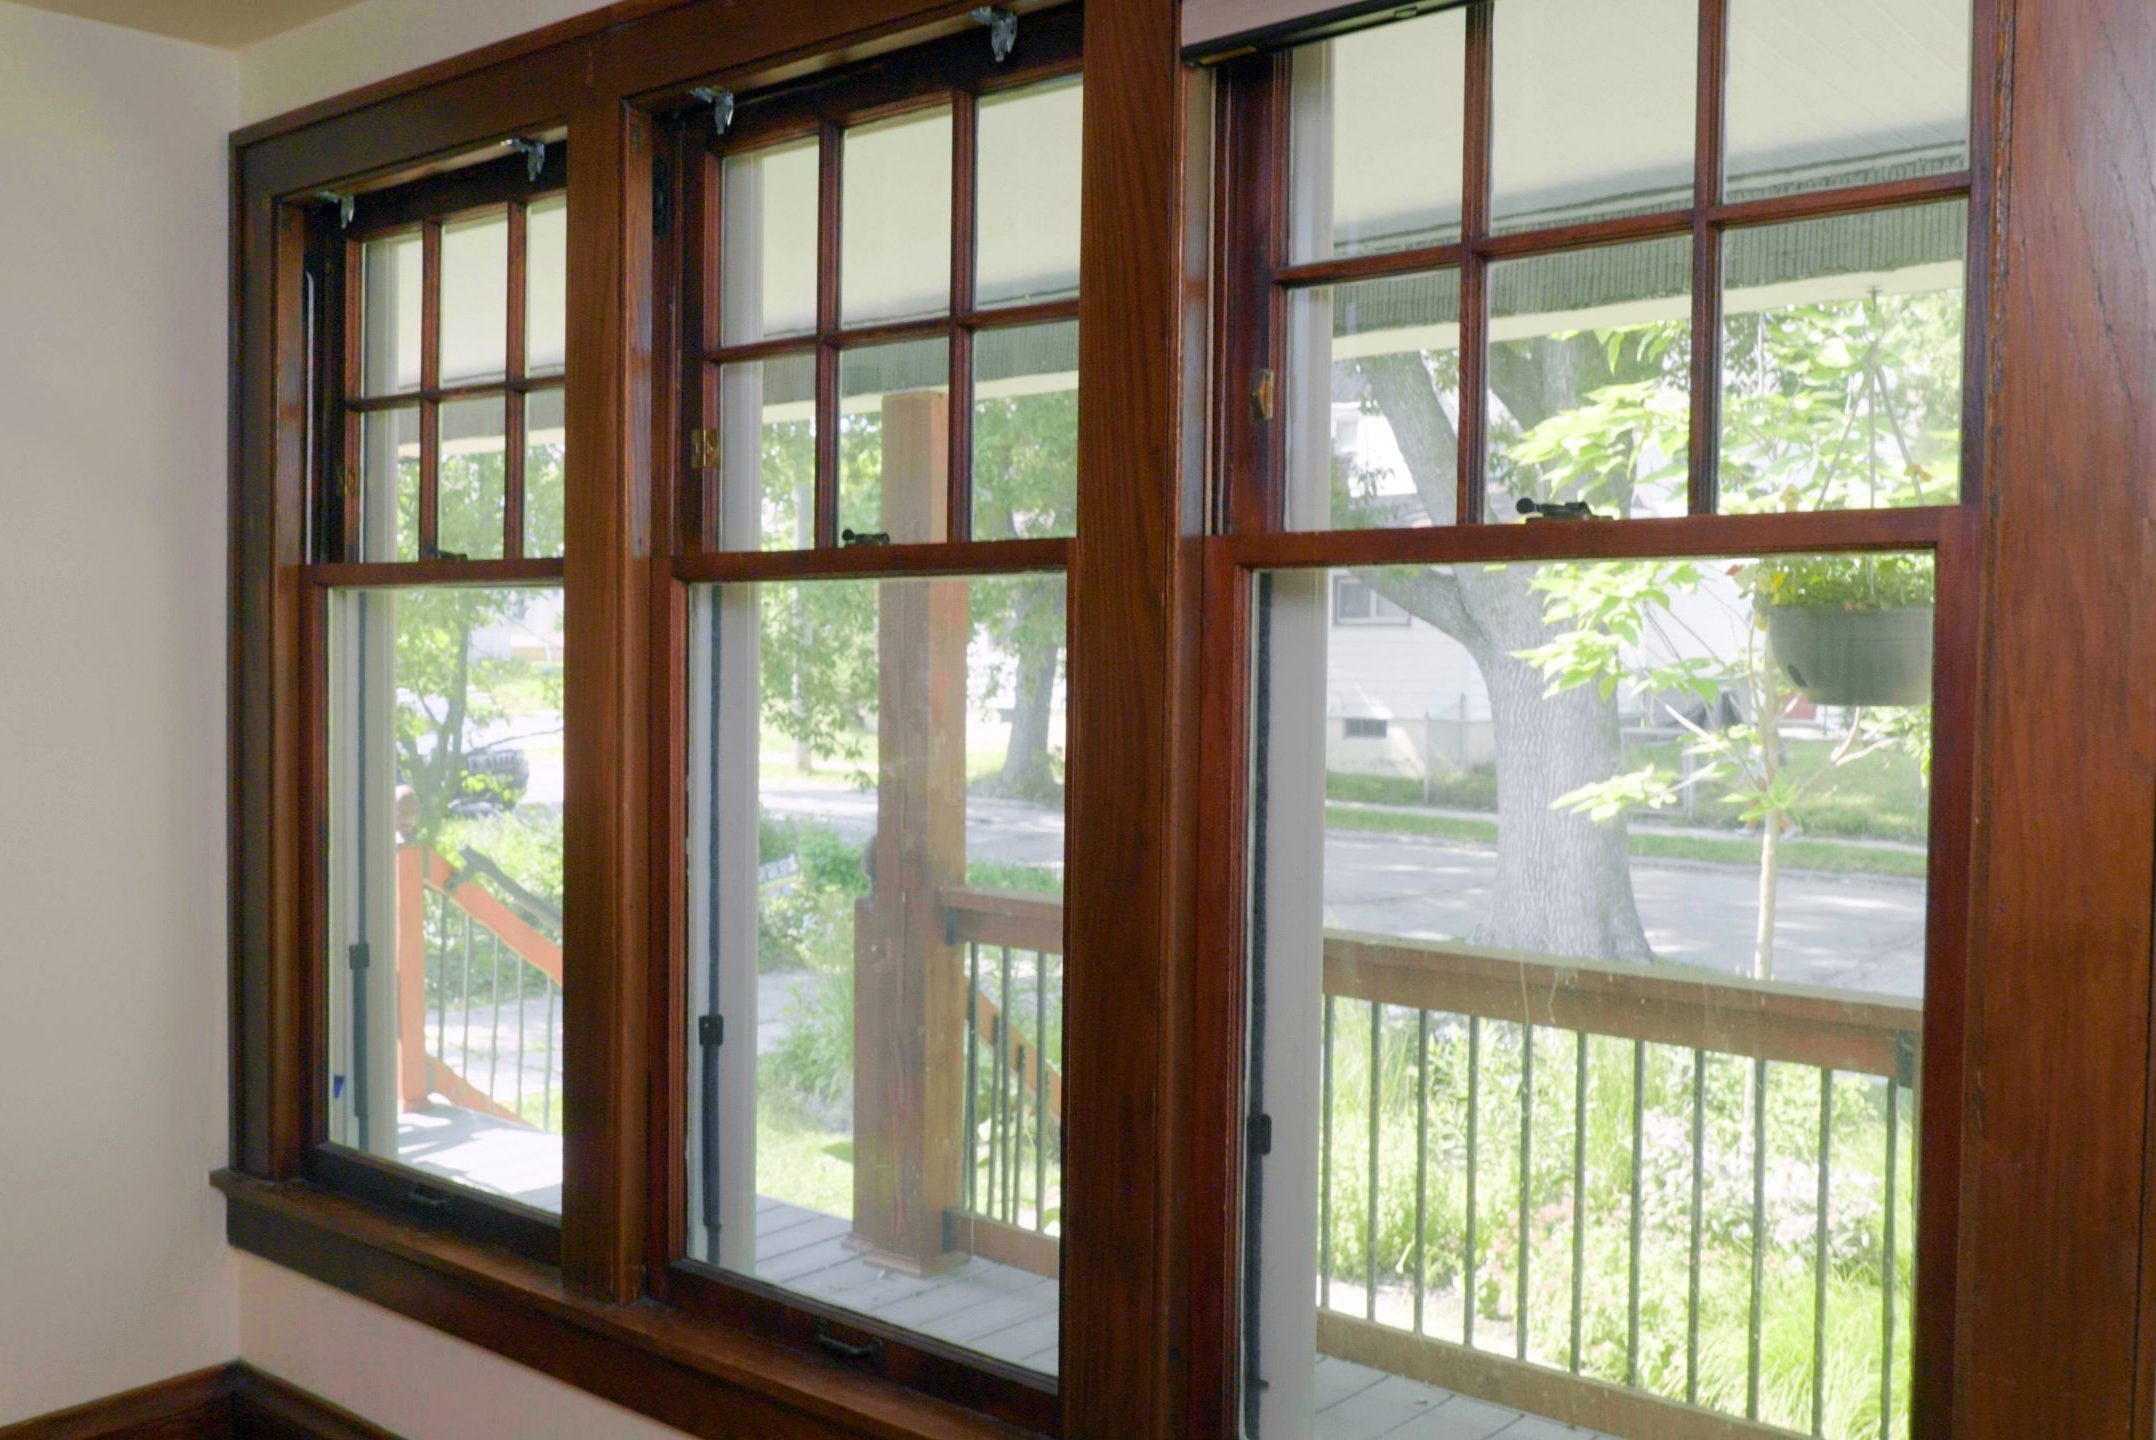 Should You Buy New Windows? A Complete Guide